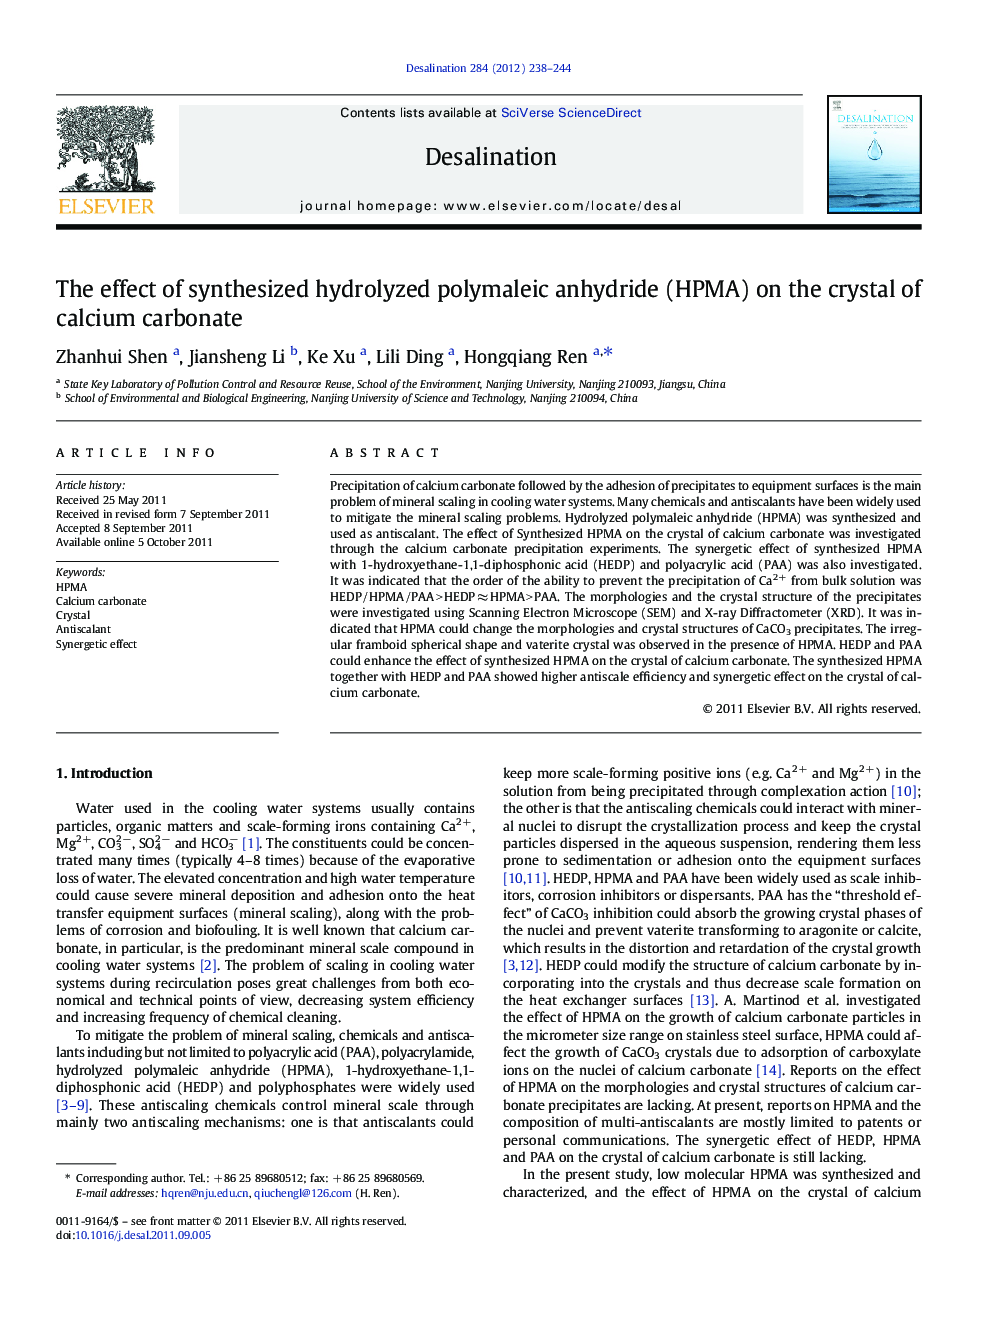 The effect of synthesized hydrolyzed polymaleic anhydride (HPMA) on the crystal of calcium carbonate